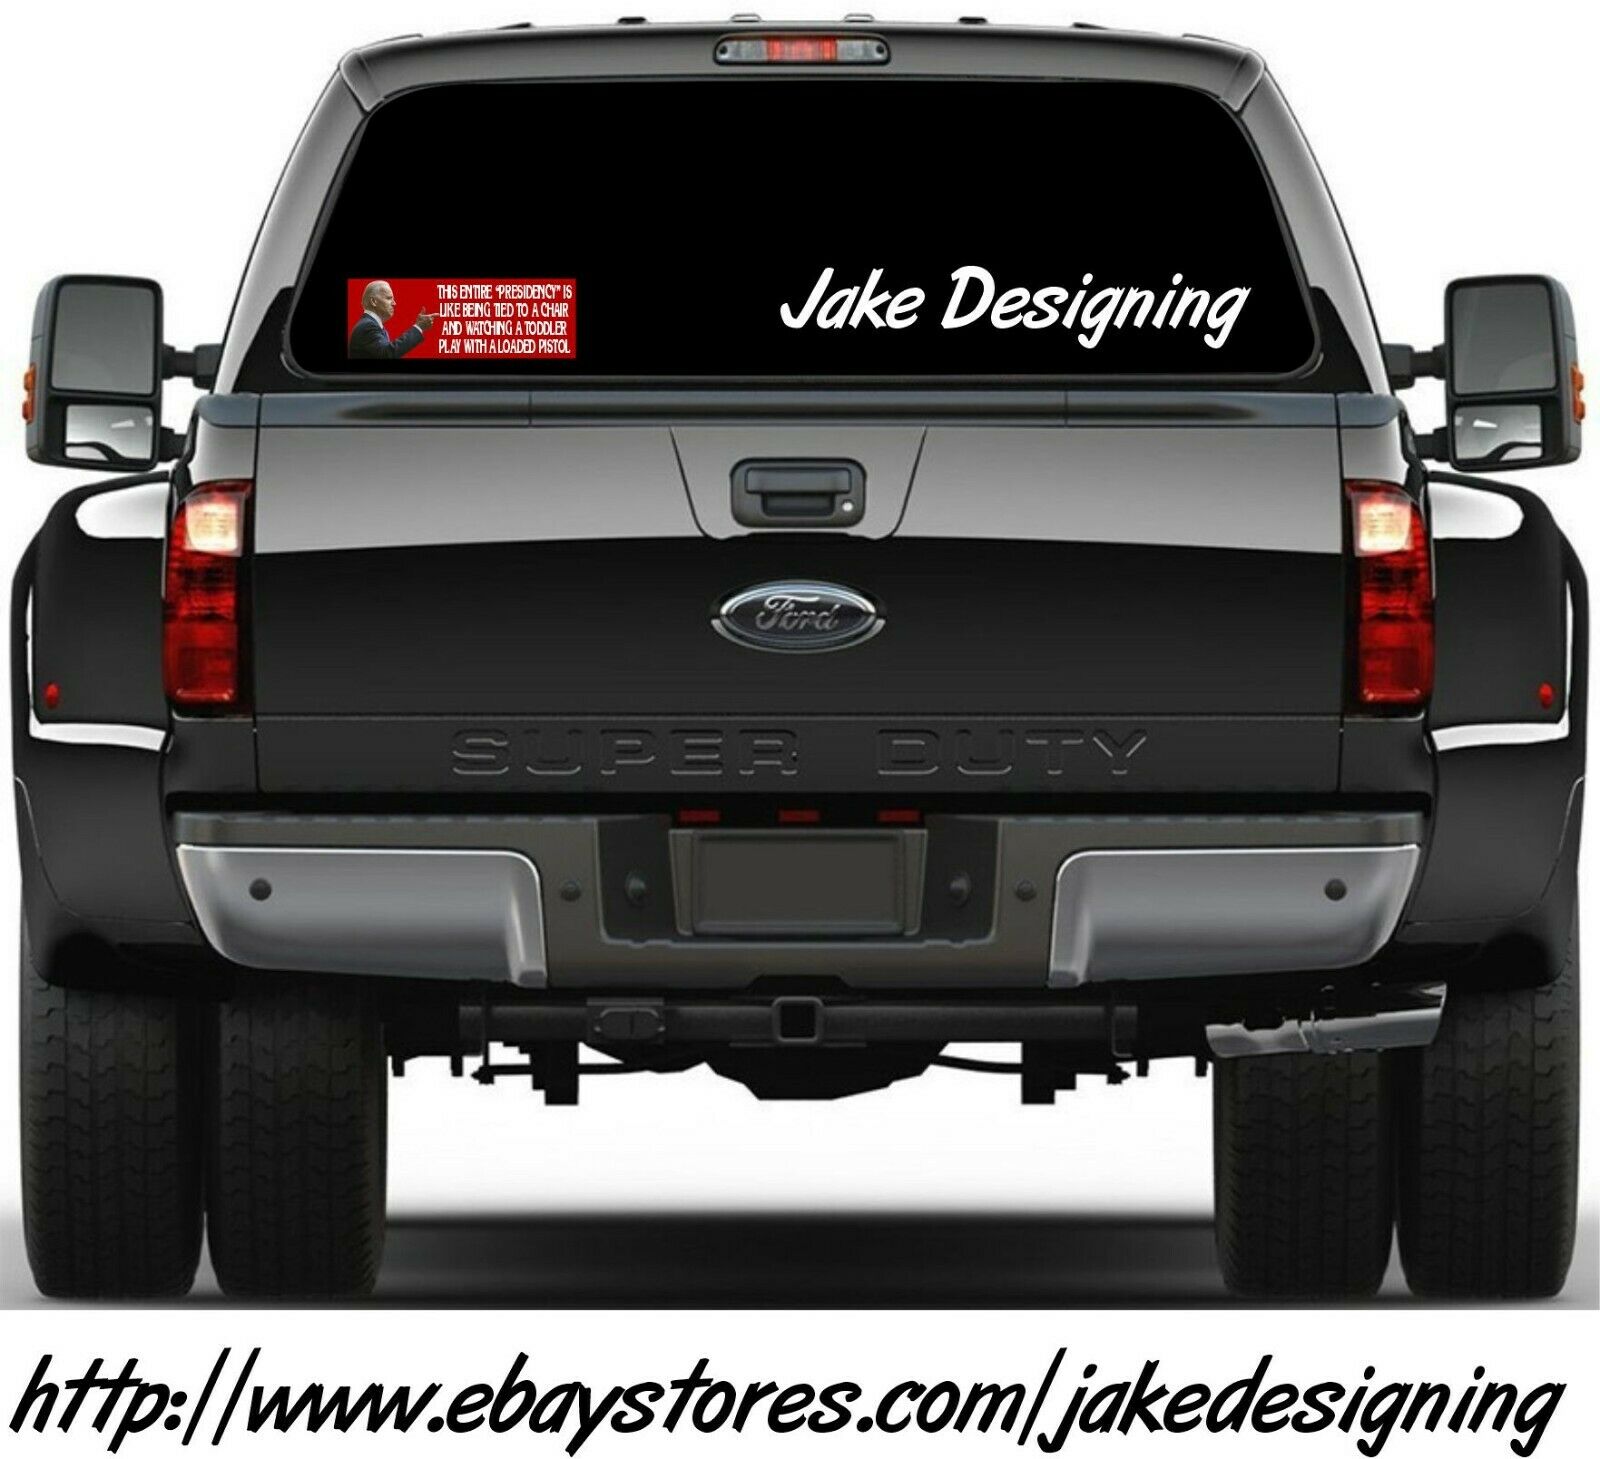 Anti Biden Bumper Sticker Playing with a loaded pistol - Powercall Sirens LLC